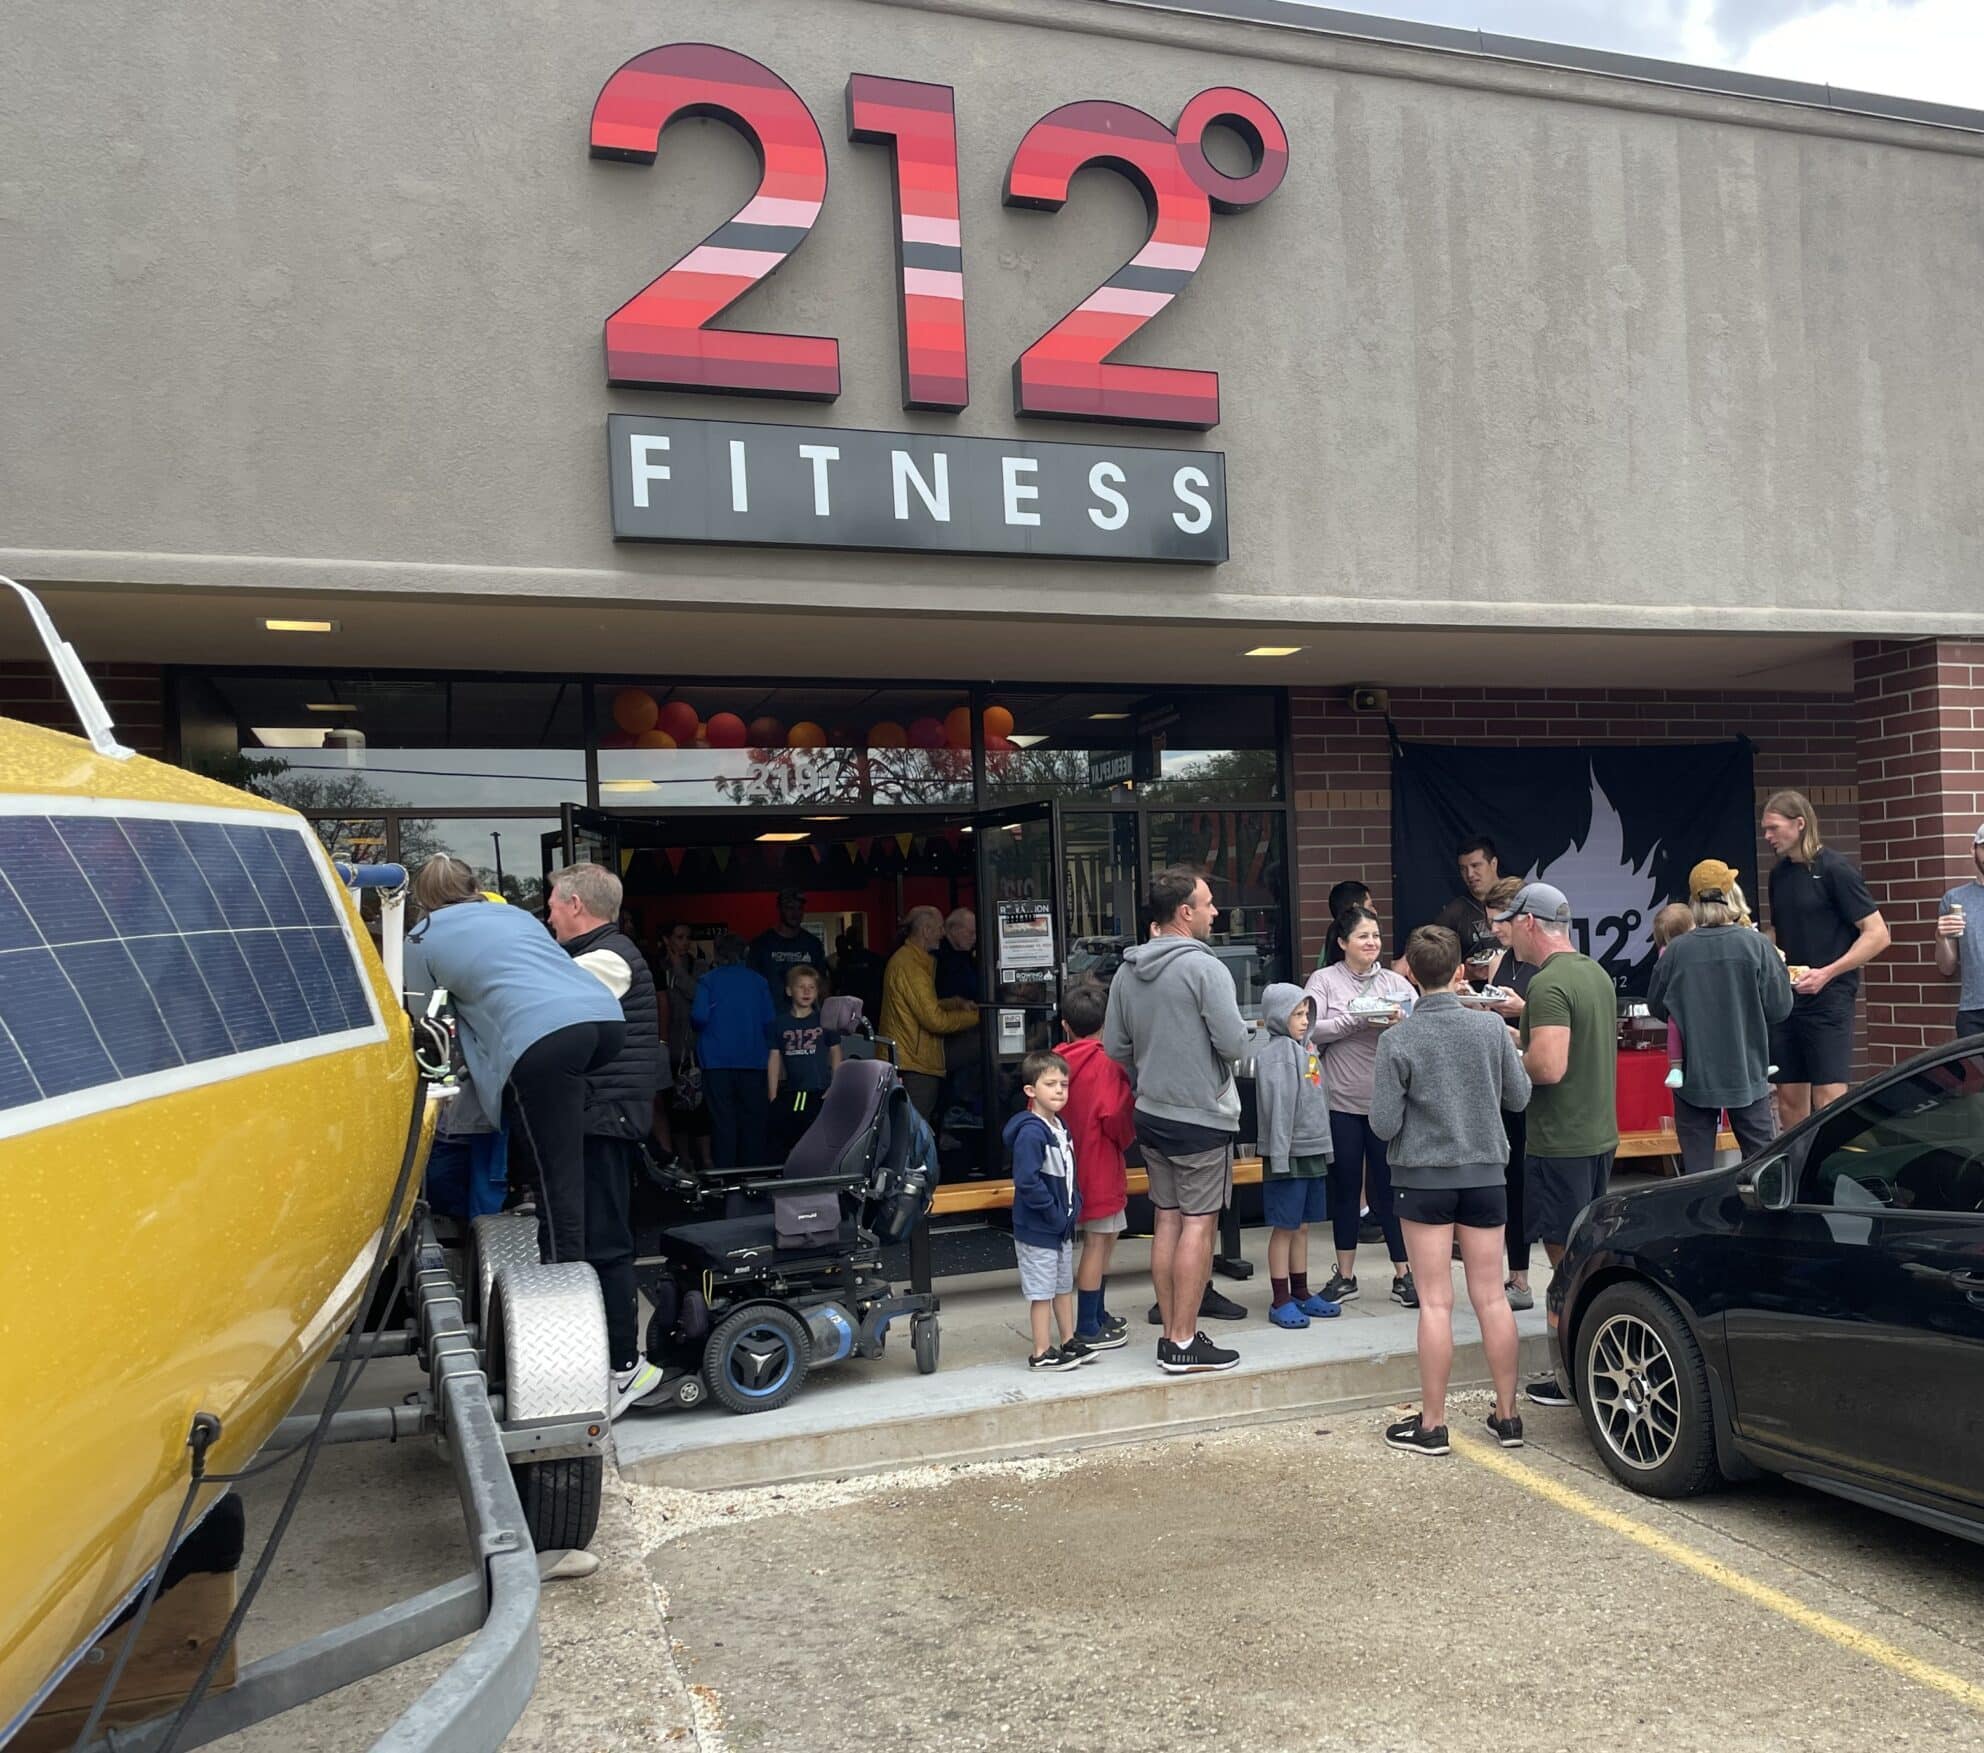 You are currently viewing 212° Fitness Row-a-Thons